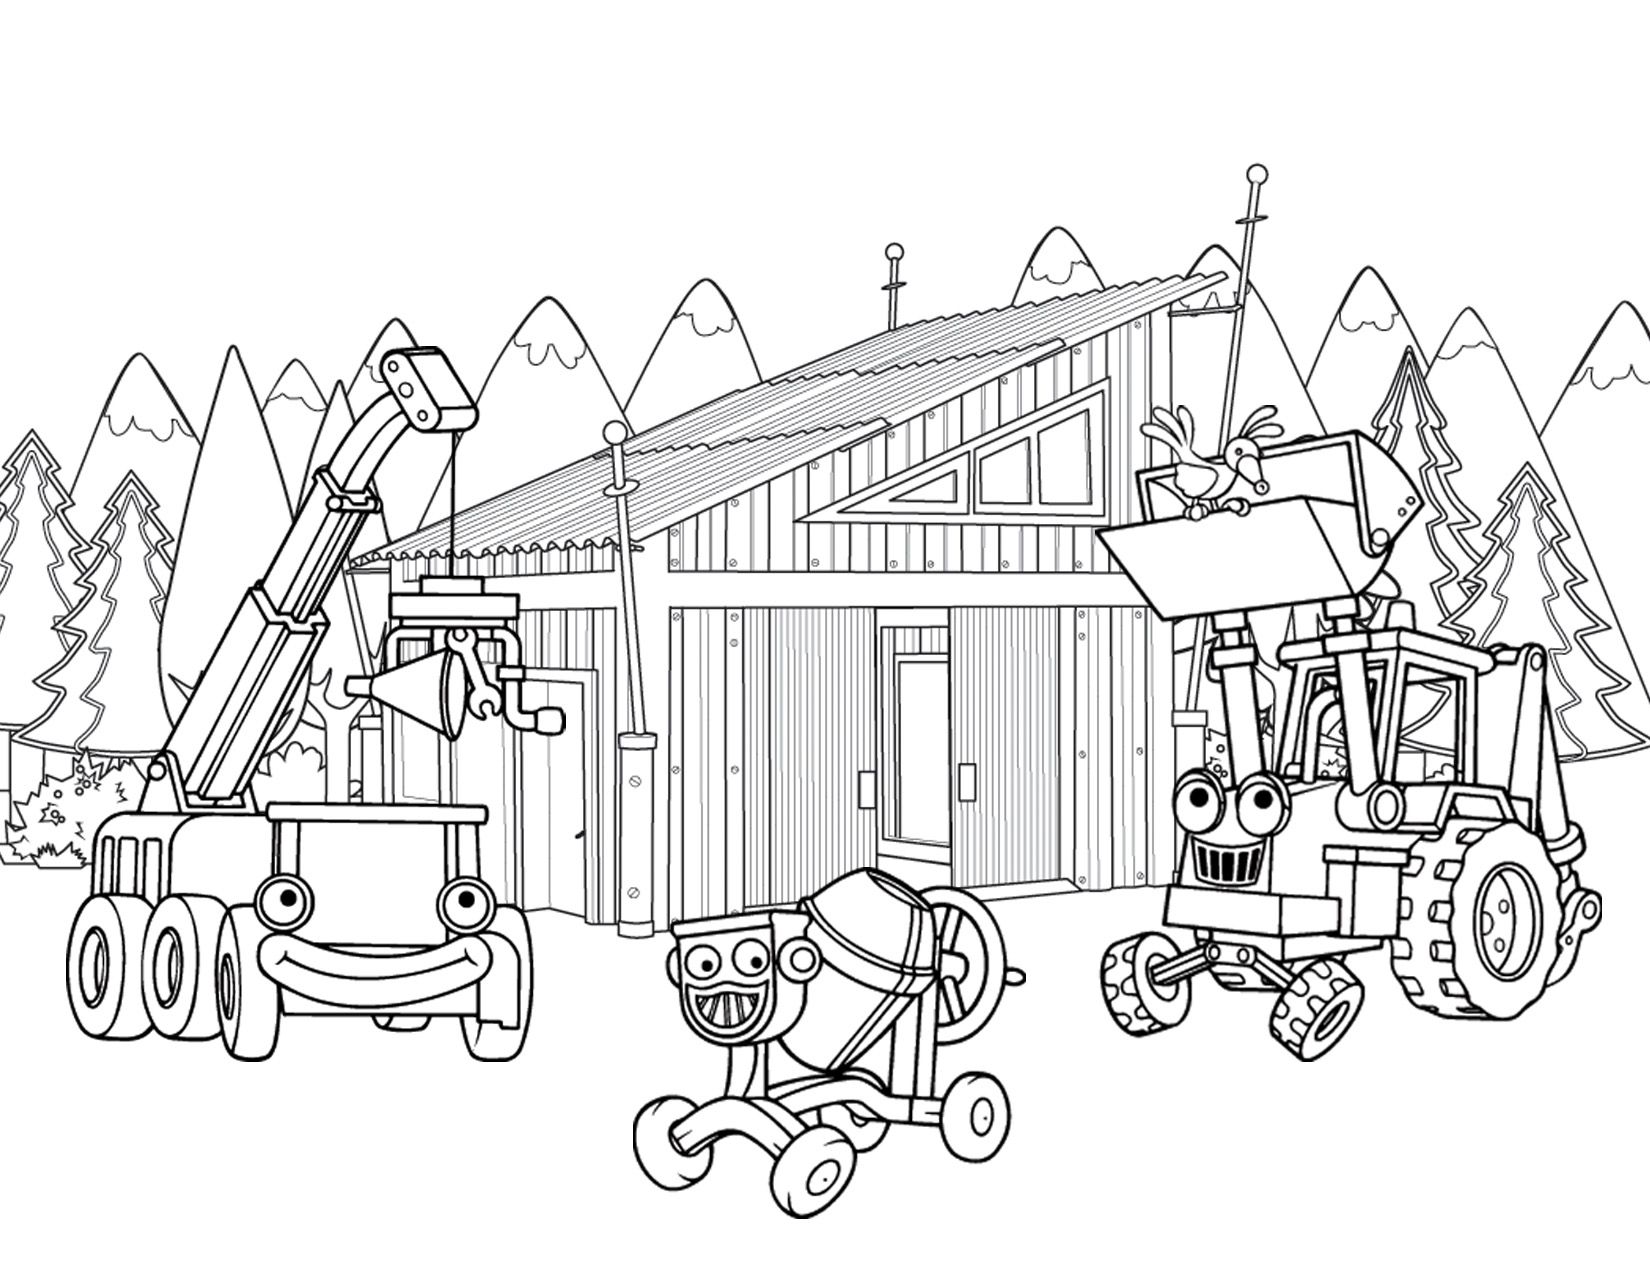 Backhoe Coloring Pages Free Printable - Coloring Pages For All Ages